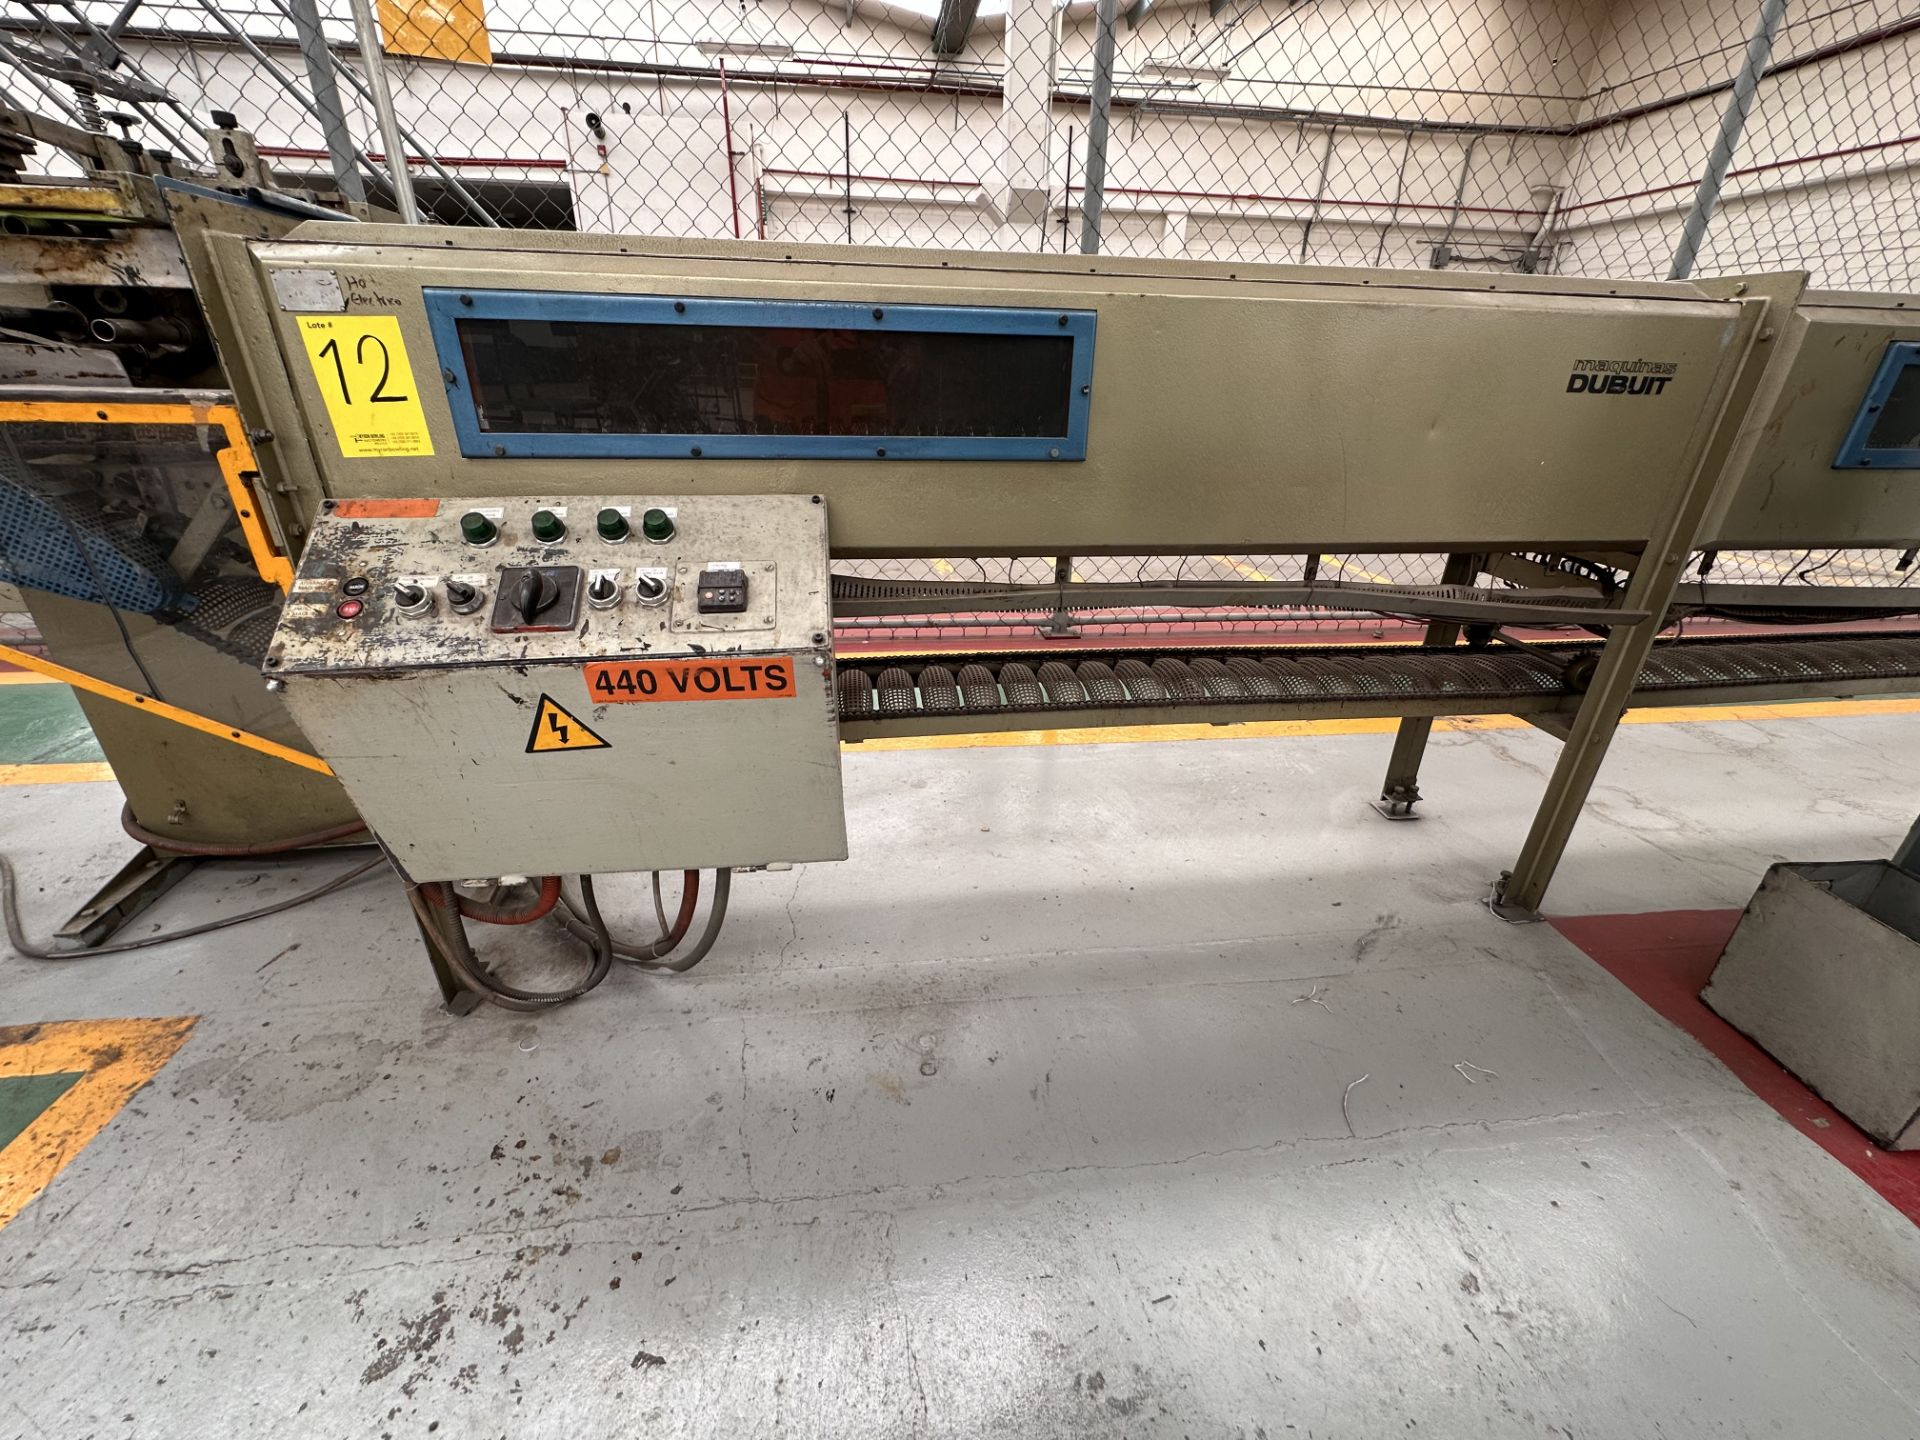 DUBUIT Electric Resistance Oven for screen printing of lids, Model 44, Serial No. 2617, Year 1979,